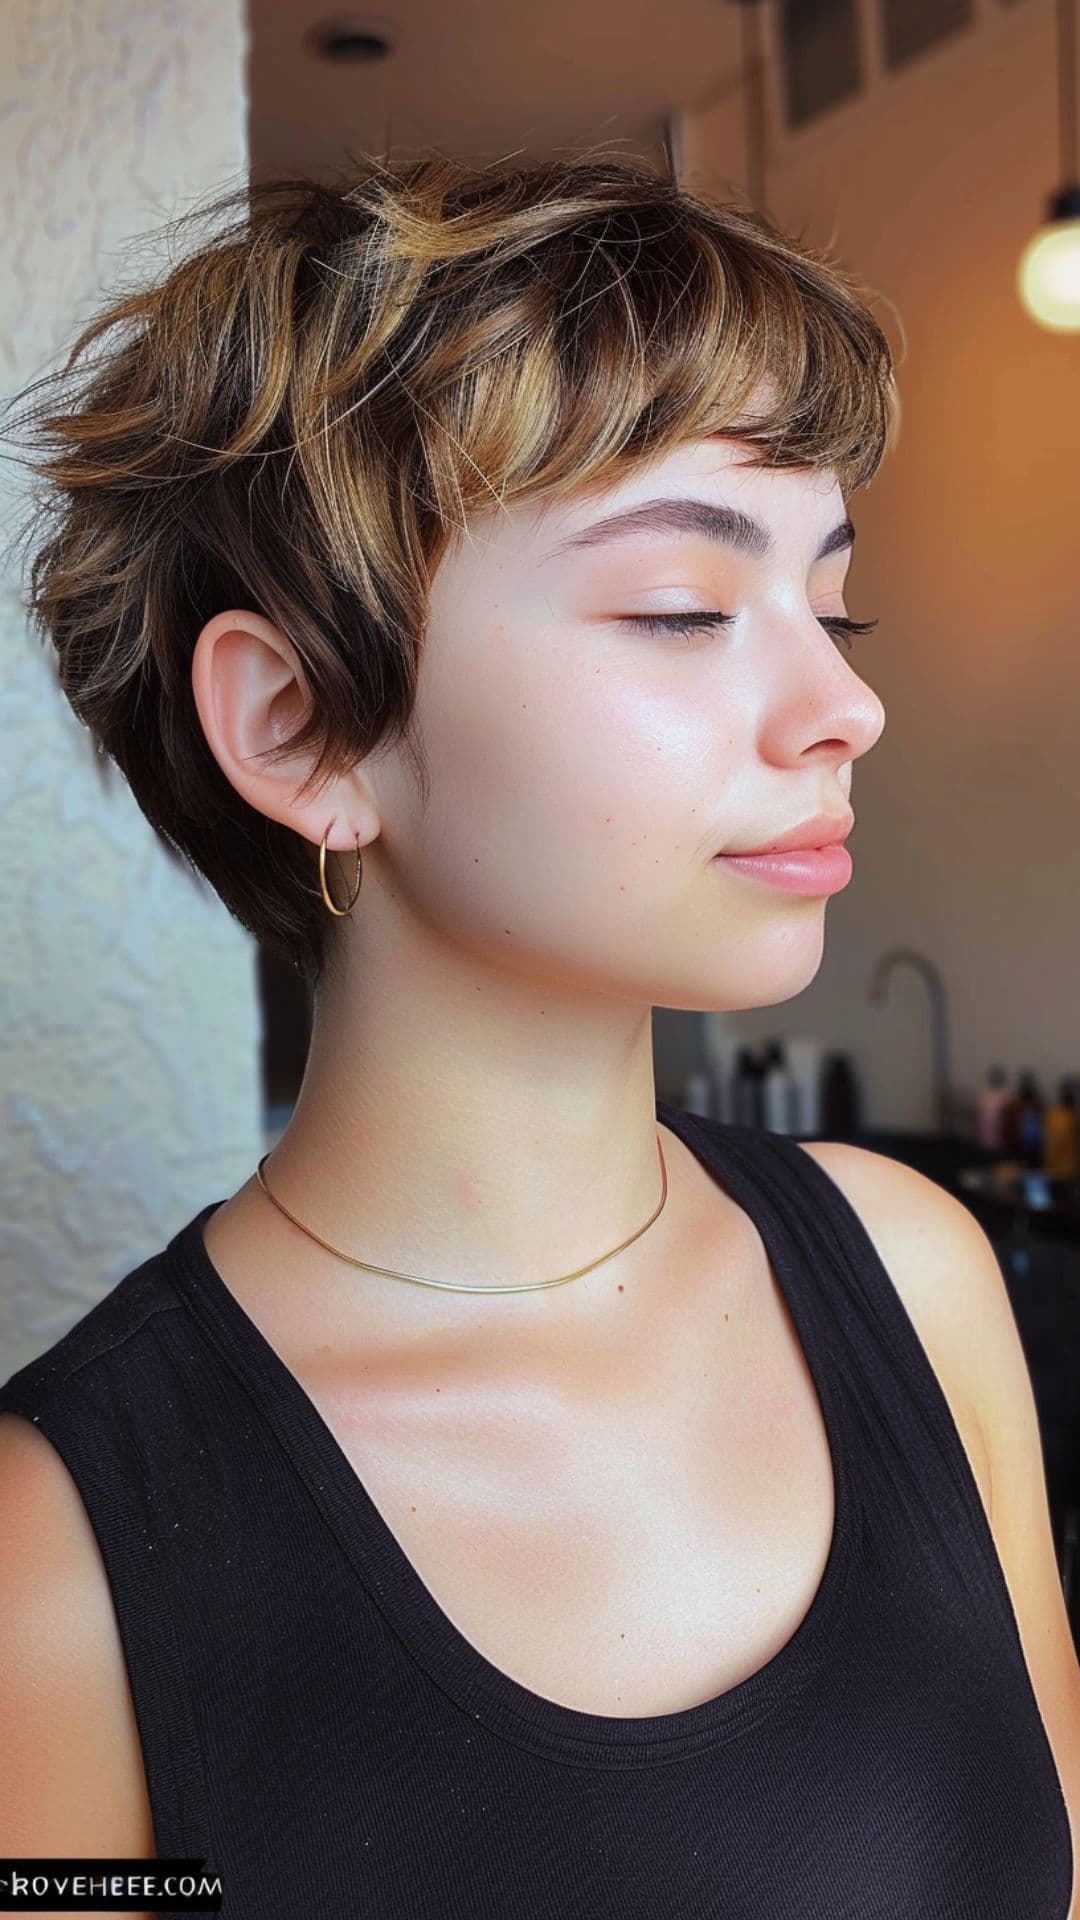 A woman modelling a retro-inspired pixie cut.